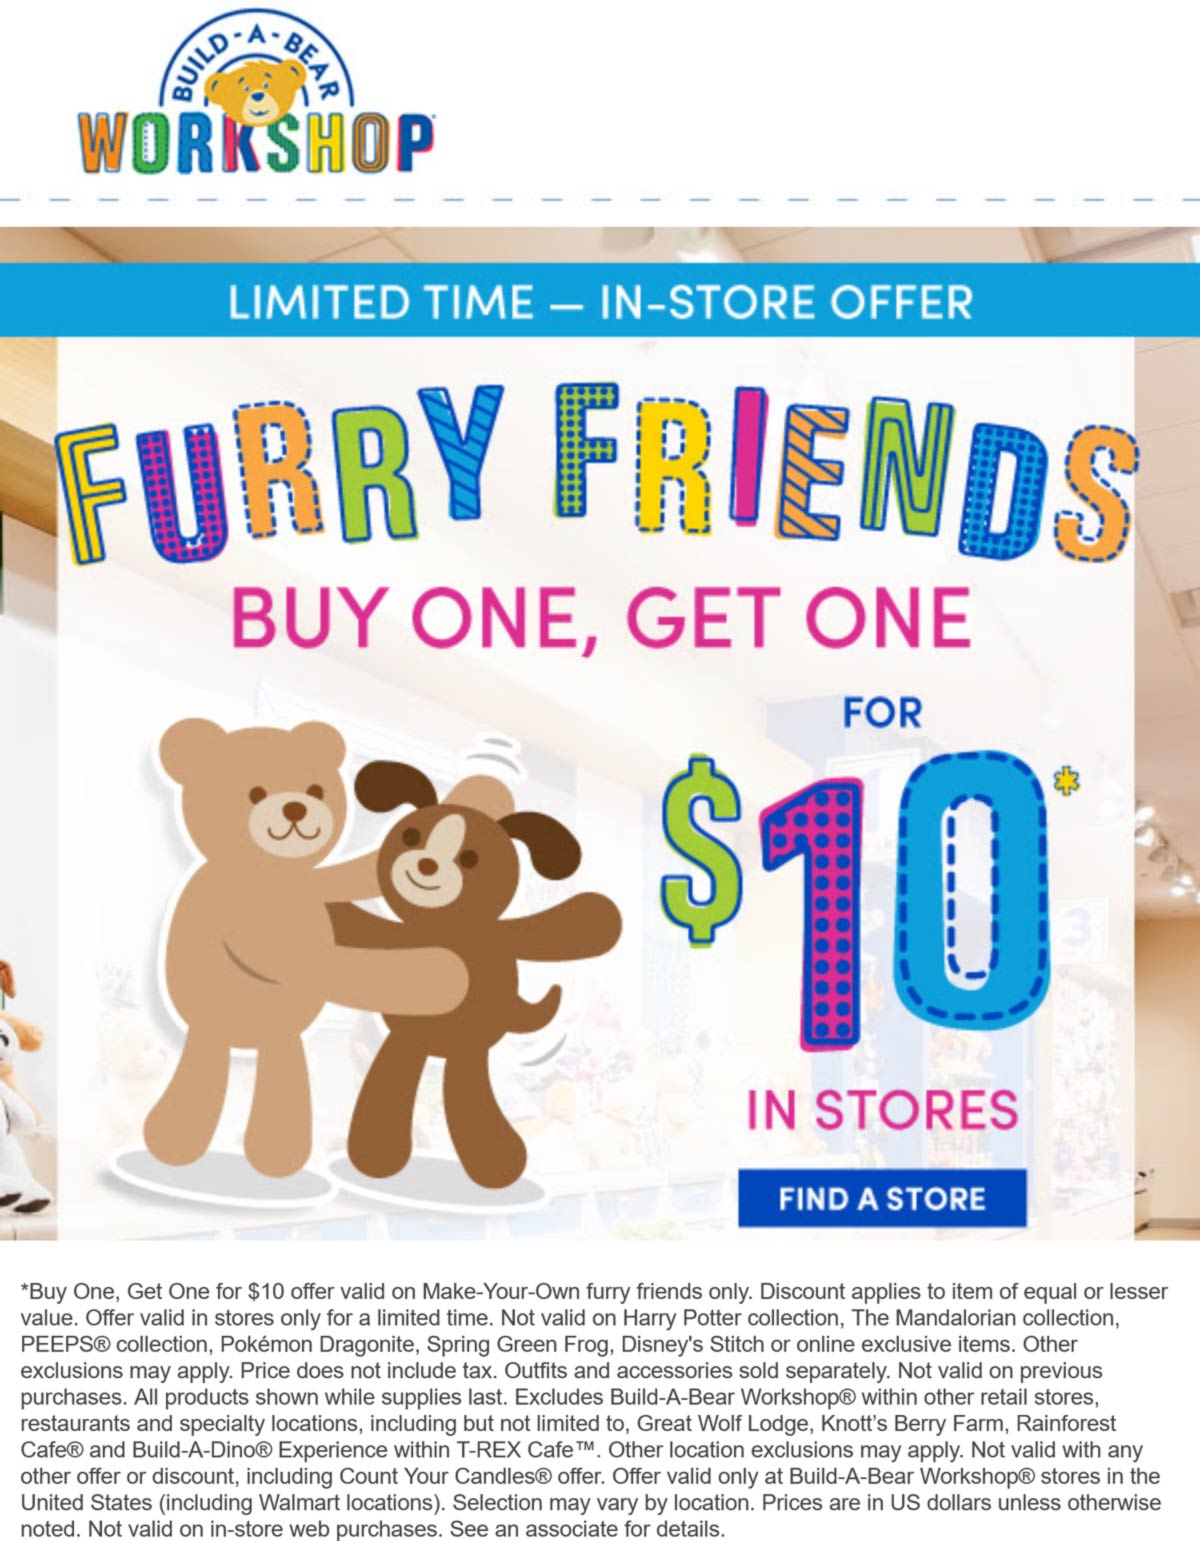 Second furry friend 10 at BuildABear buildabear The